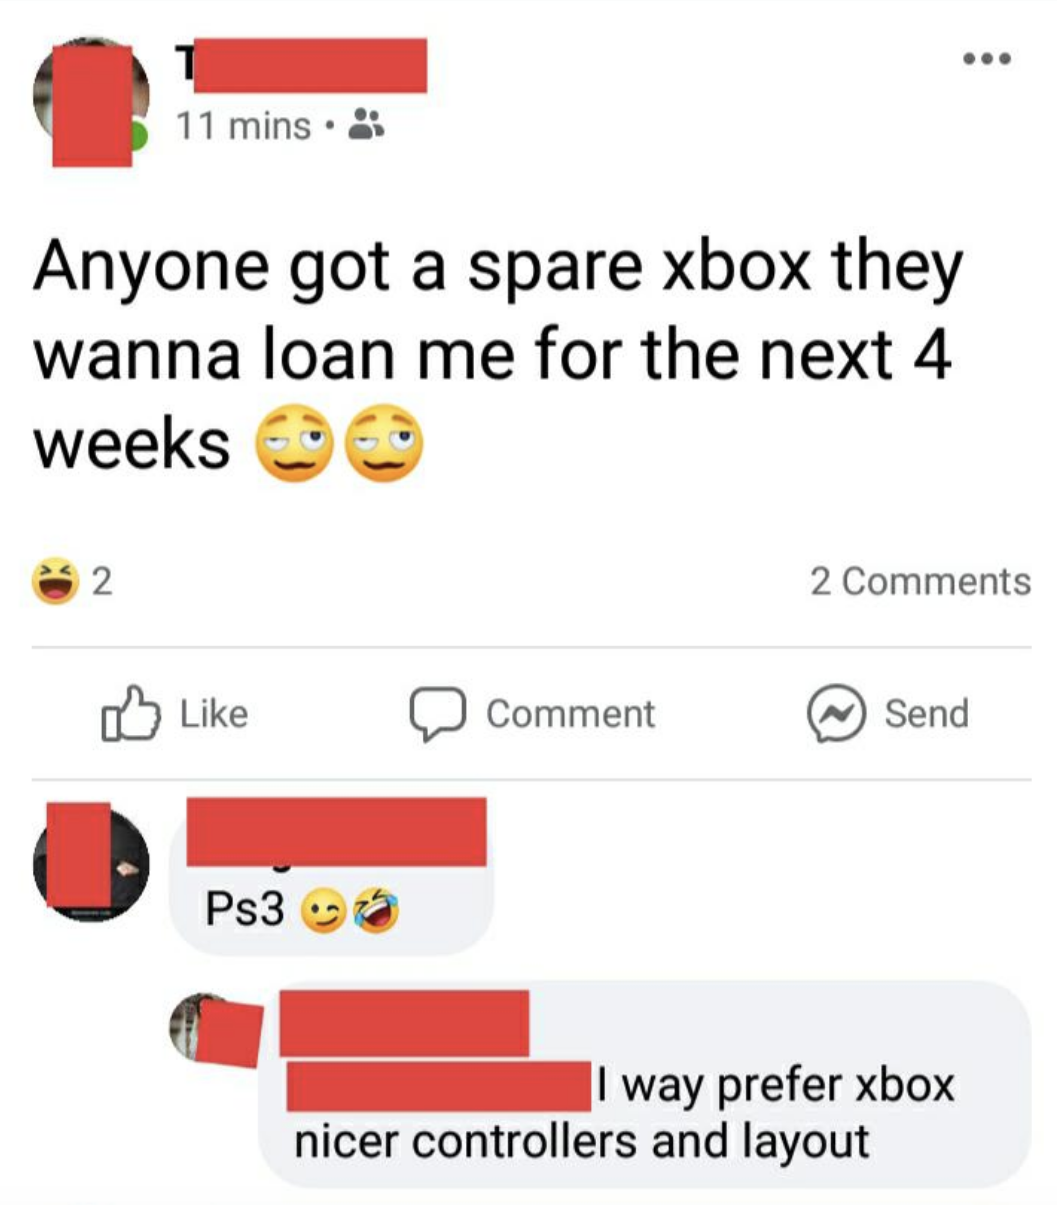 She&#x27;s asking for a &quot;spare Xbox&quot; someone can loan her for 4 weeks, and when someone offers a PS3, she says she prefers Xbox; &quot;nicer controllers and layout&quot;